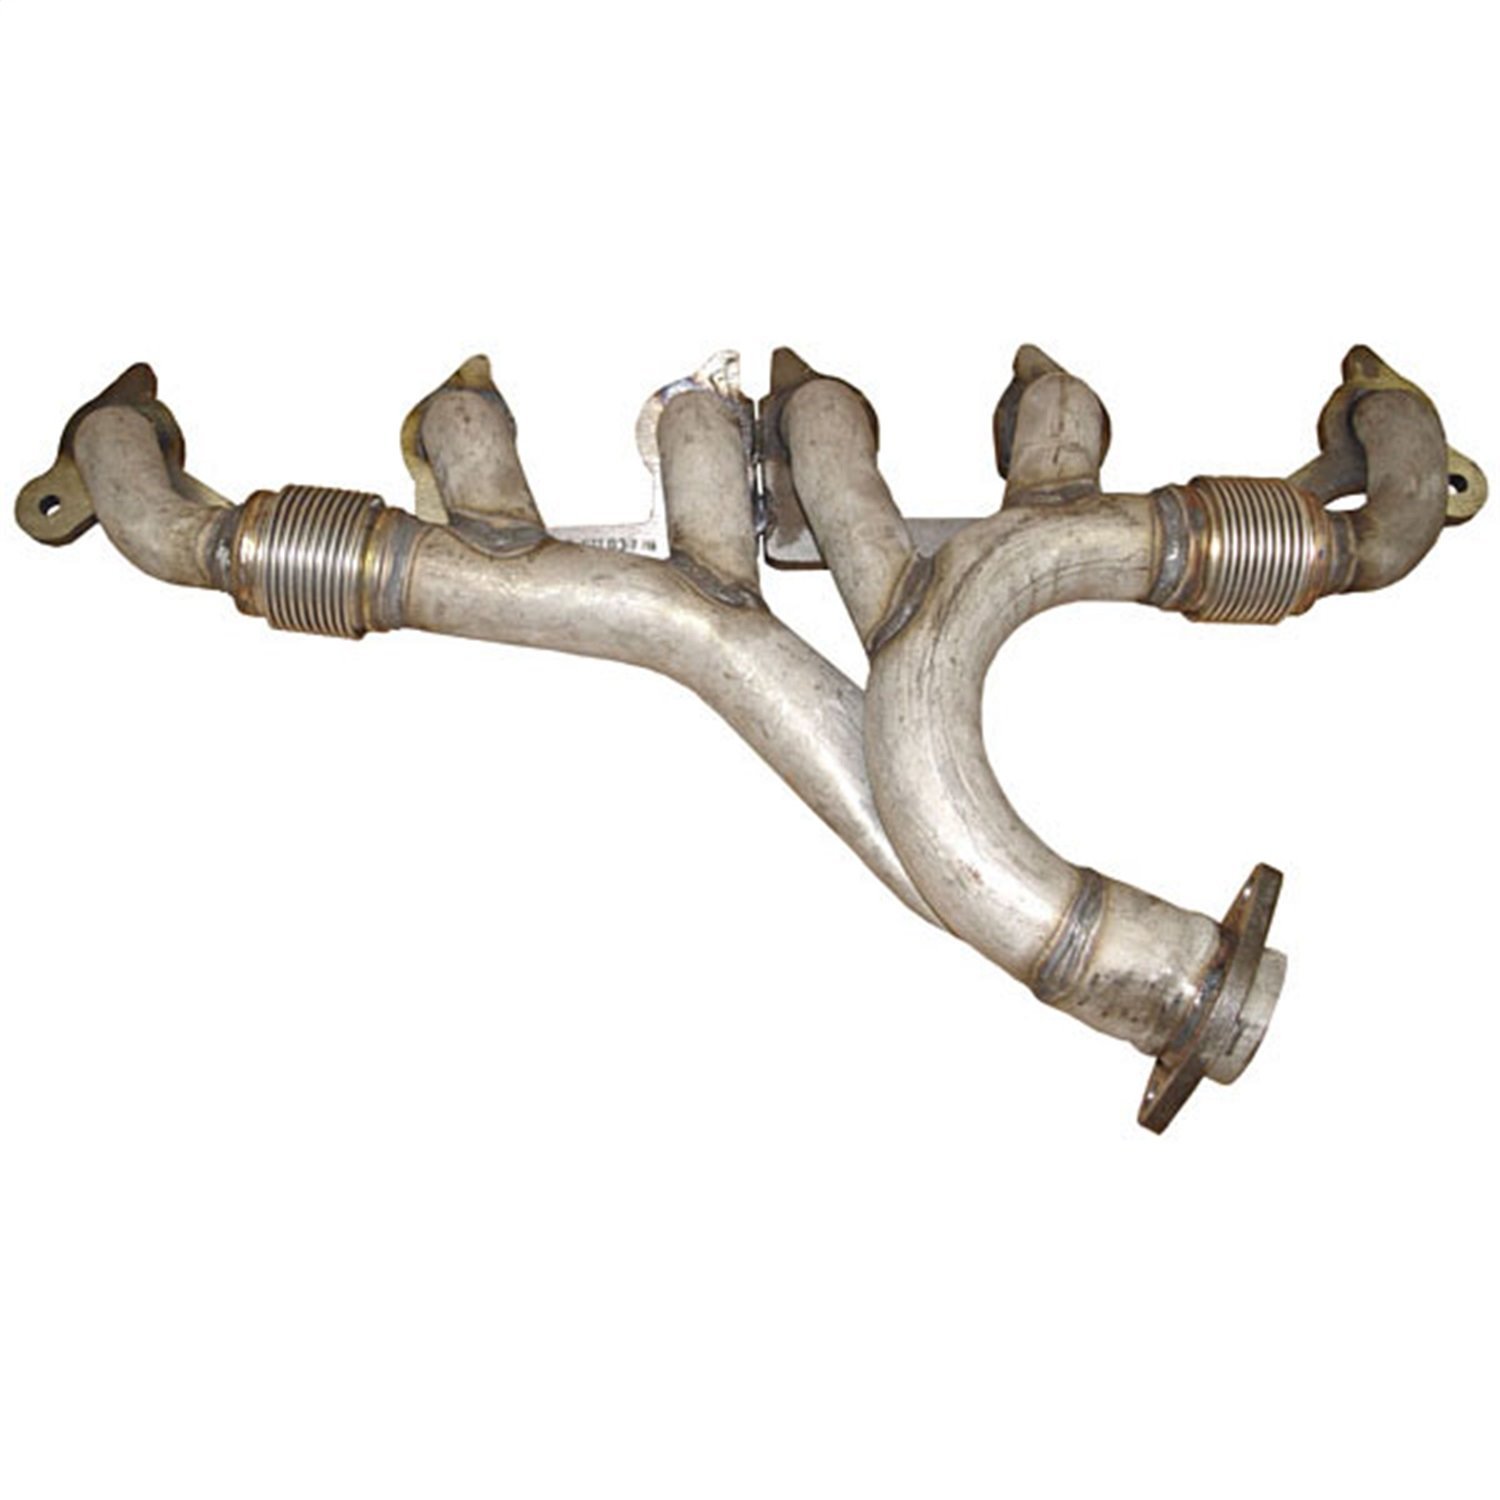 Replacement exhaust manifold kit from Omix-ADA, Fits 91-99 Cherokees & Wranglers and 93-98 Grand